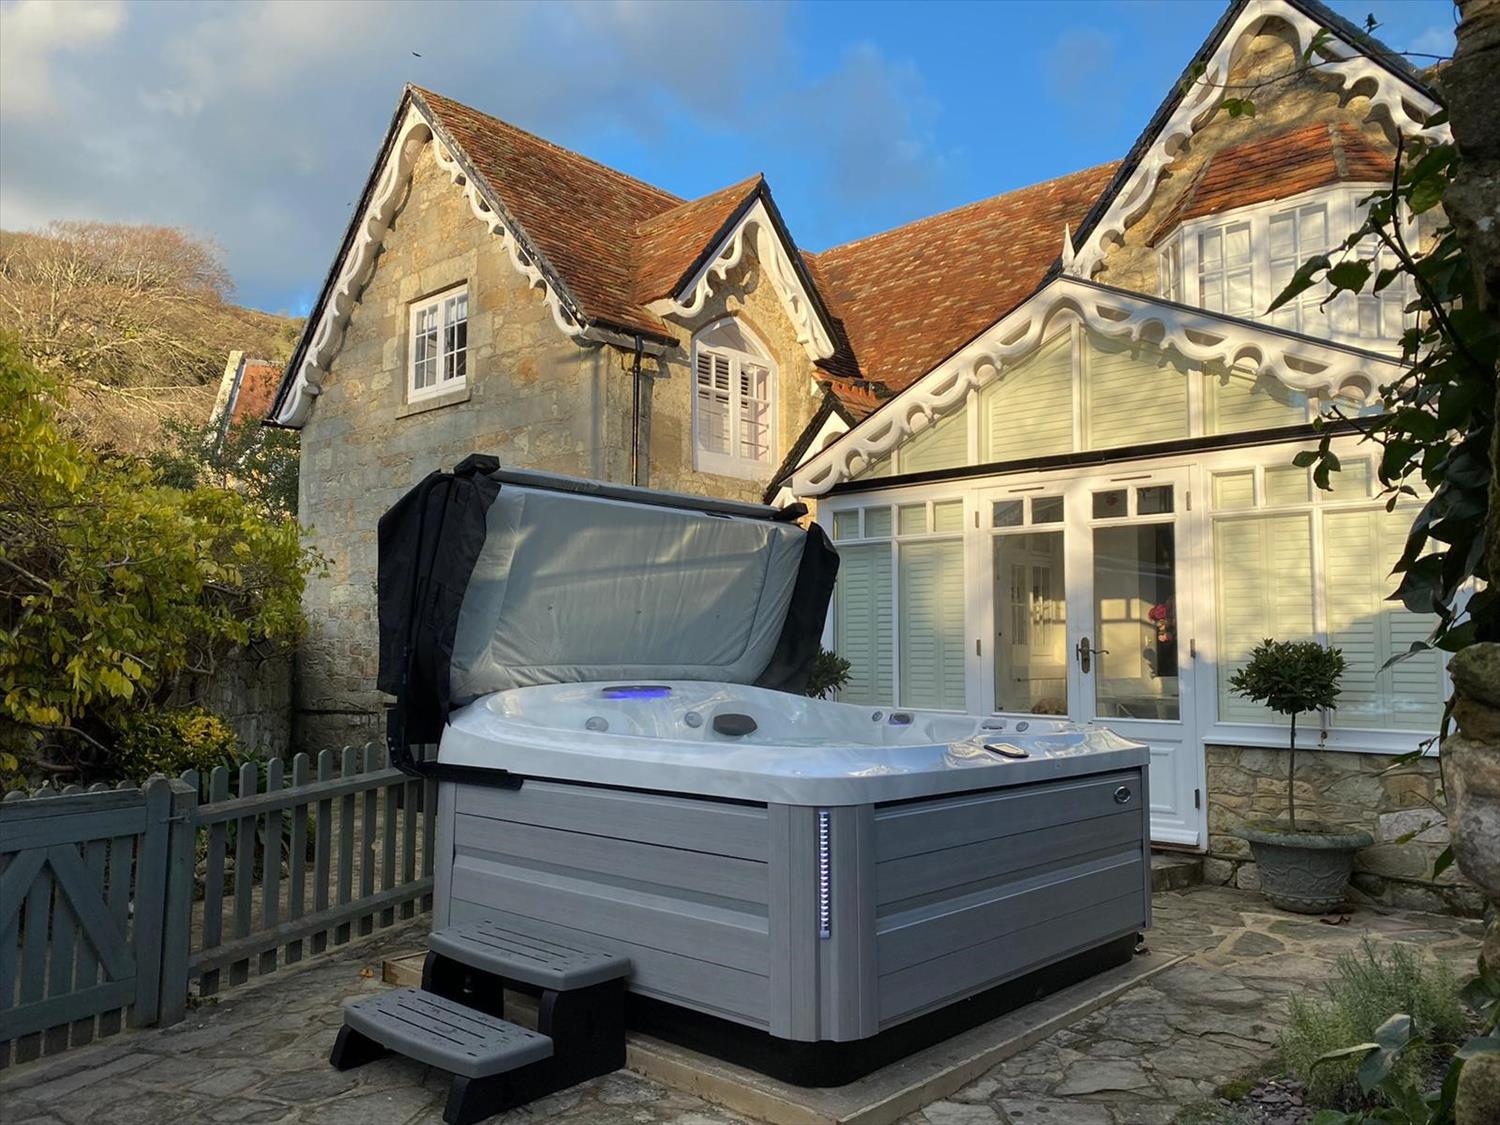 Escape to the Isle of Wight and relax in style at Haviland luxury cottage